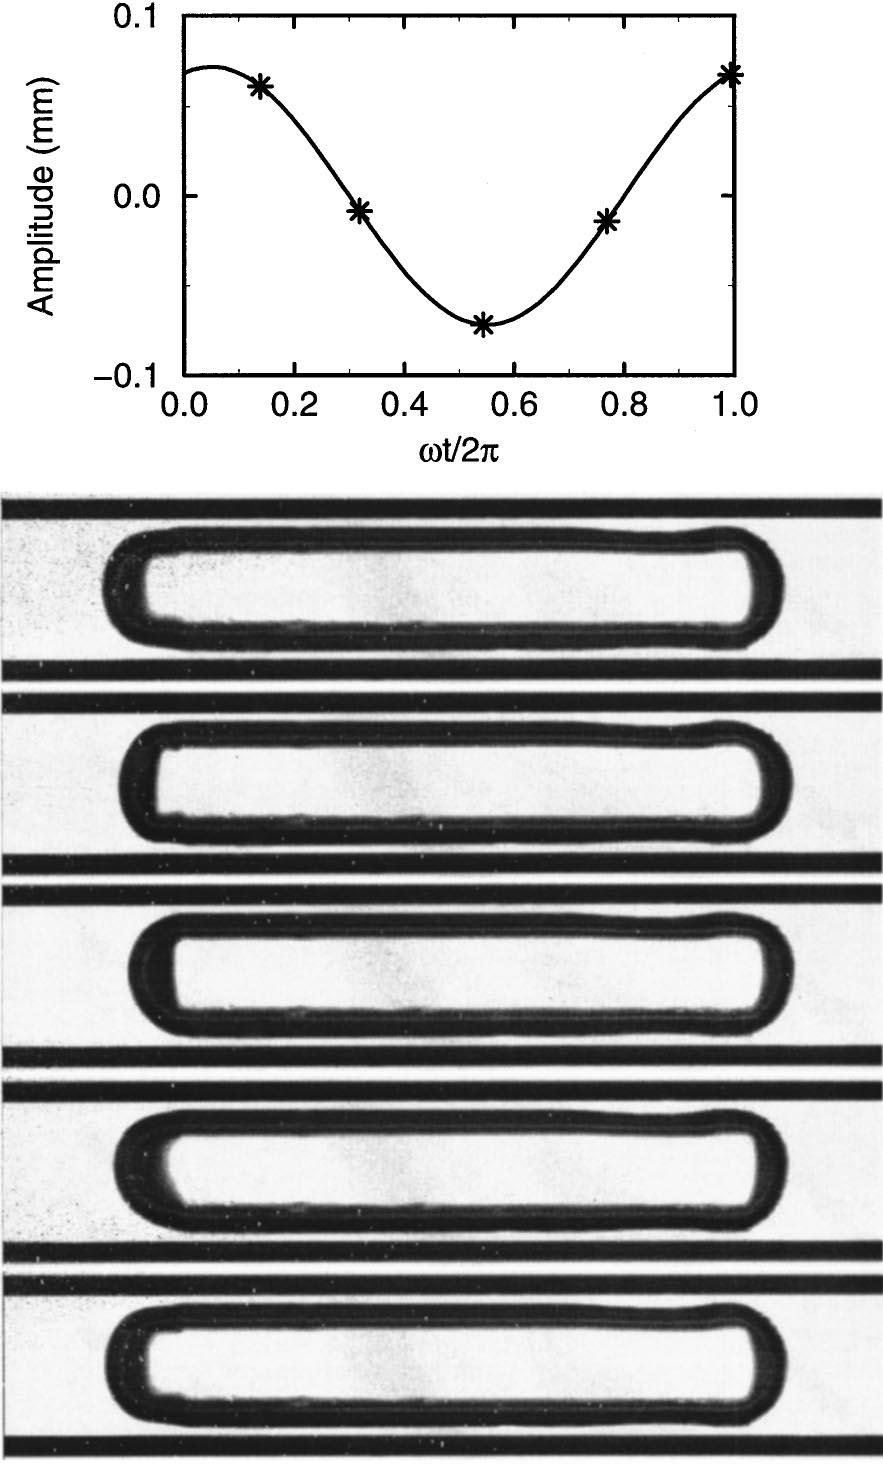 FIG. 4. Sample sequences of gas-bubble oscillations at 150 Hz for the water Triton-X-100 solution in the 1-mm-diameter tube. The bubble resonance frequency is 189 Hz.